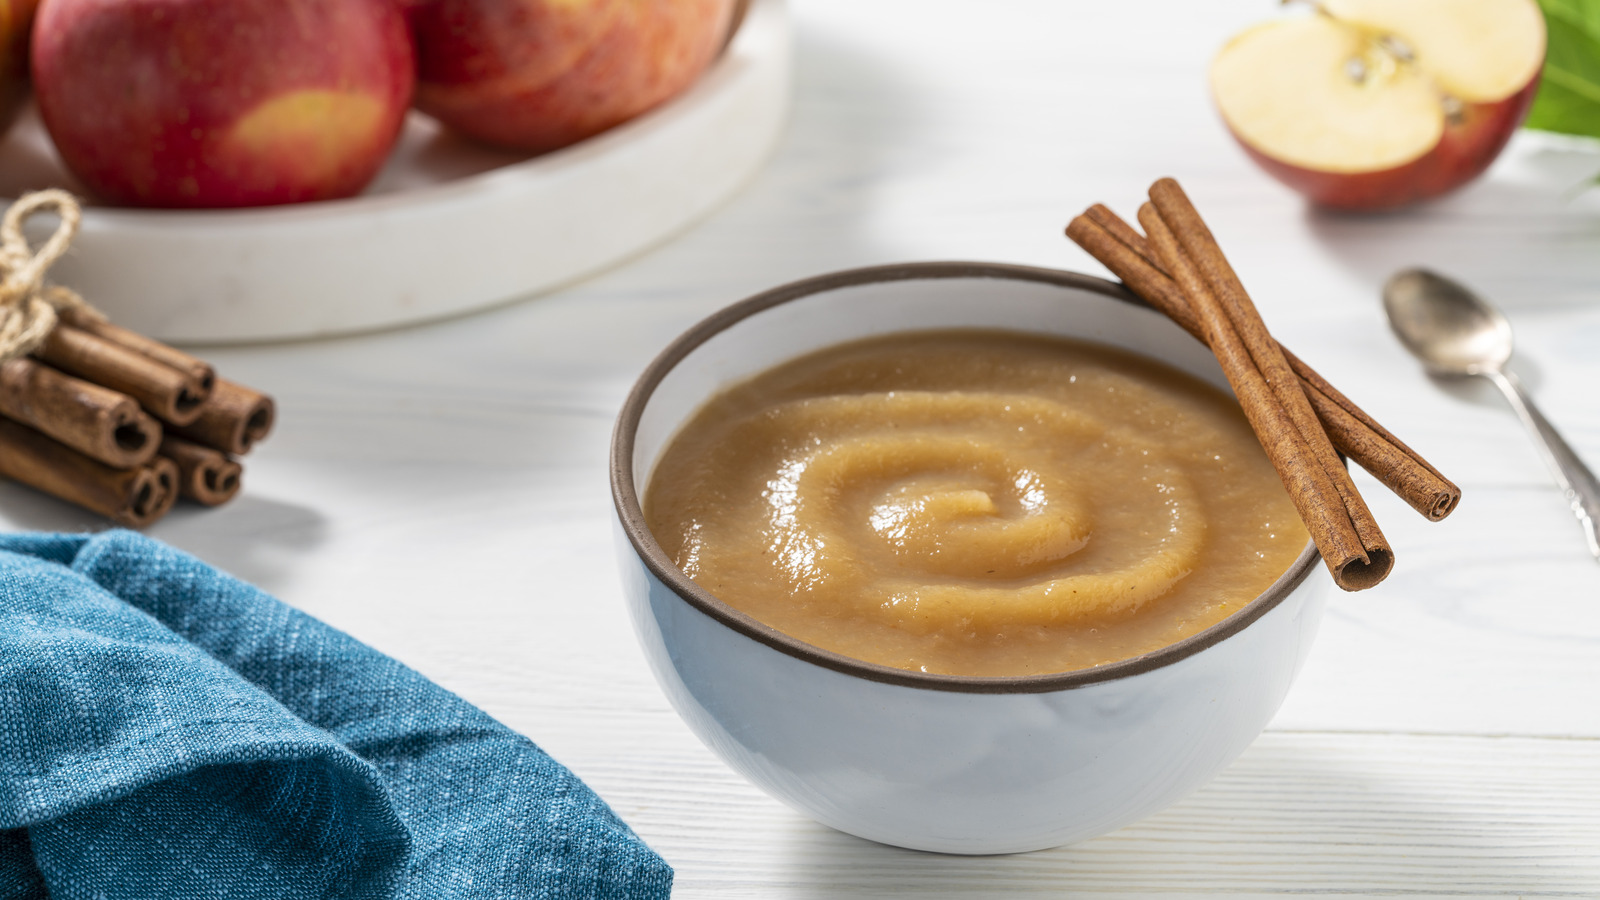 What Makes Applesauce a Great Substitute for Oil in Baking